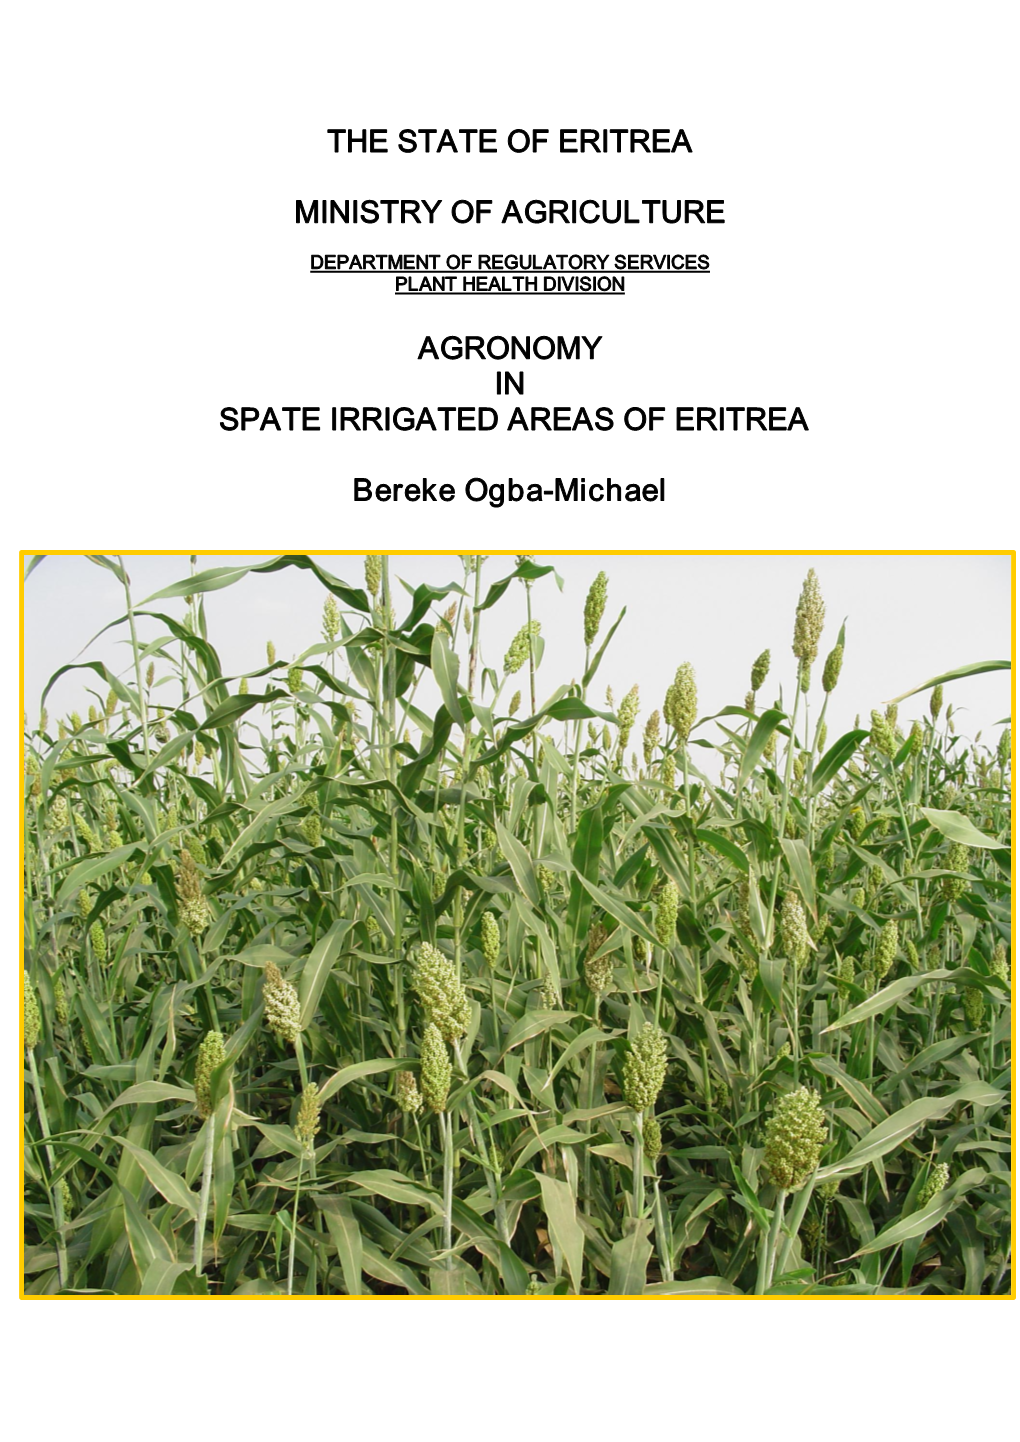 The State of Eritrea Ministry of Agriculture Agronomy In